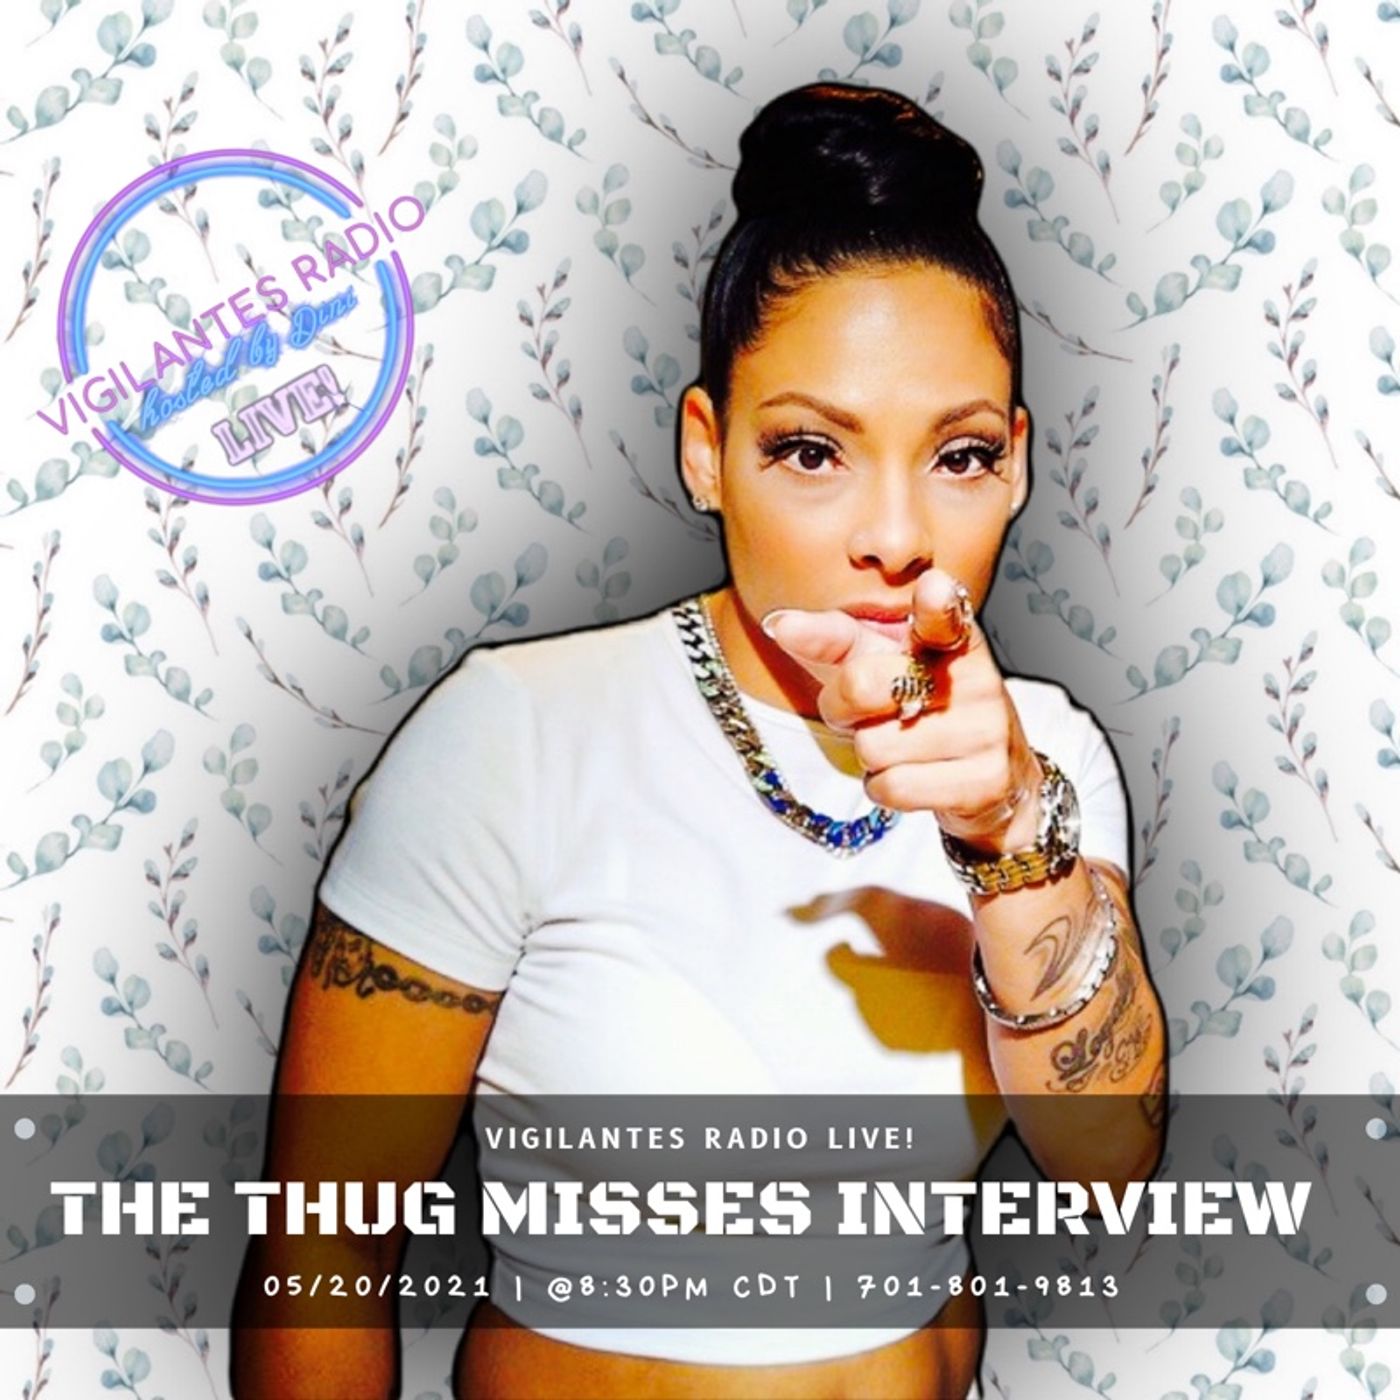 The Thug Misses Interview. Image